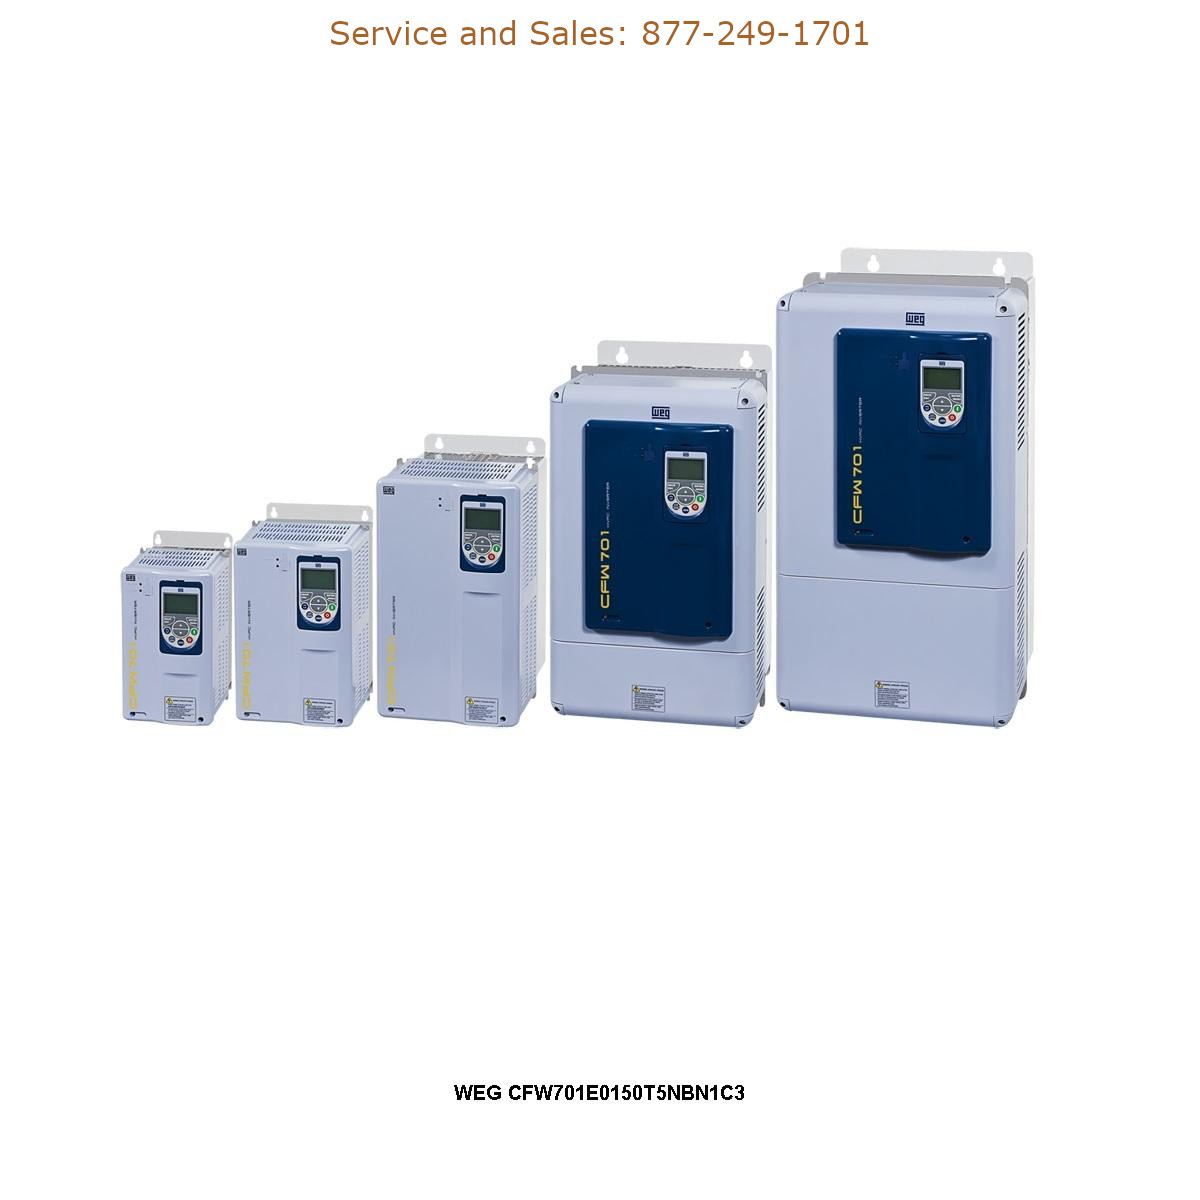 WEG CFW701E0150T5NBN1C3 WEG Model Number CFW701E0150T5NBN1C3 WEG Drives, Variable Speed Drives Repair Service, Troubleshooting, Replacement Parts https://gesrepair.com/wp-content/uploads/2022/WEG/WEG_CFW701E0150T5NBN1C3_Drives_Variable_Speed_Drives.jpg